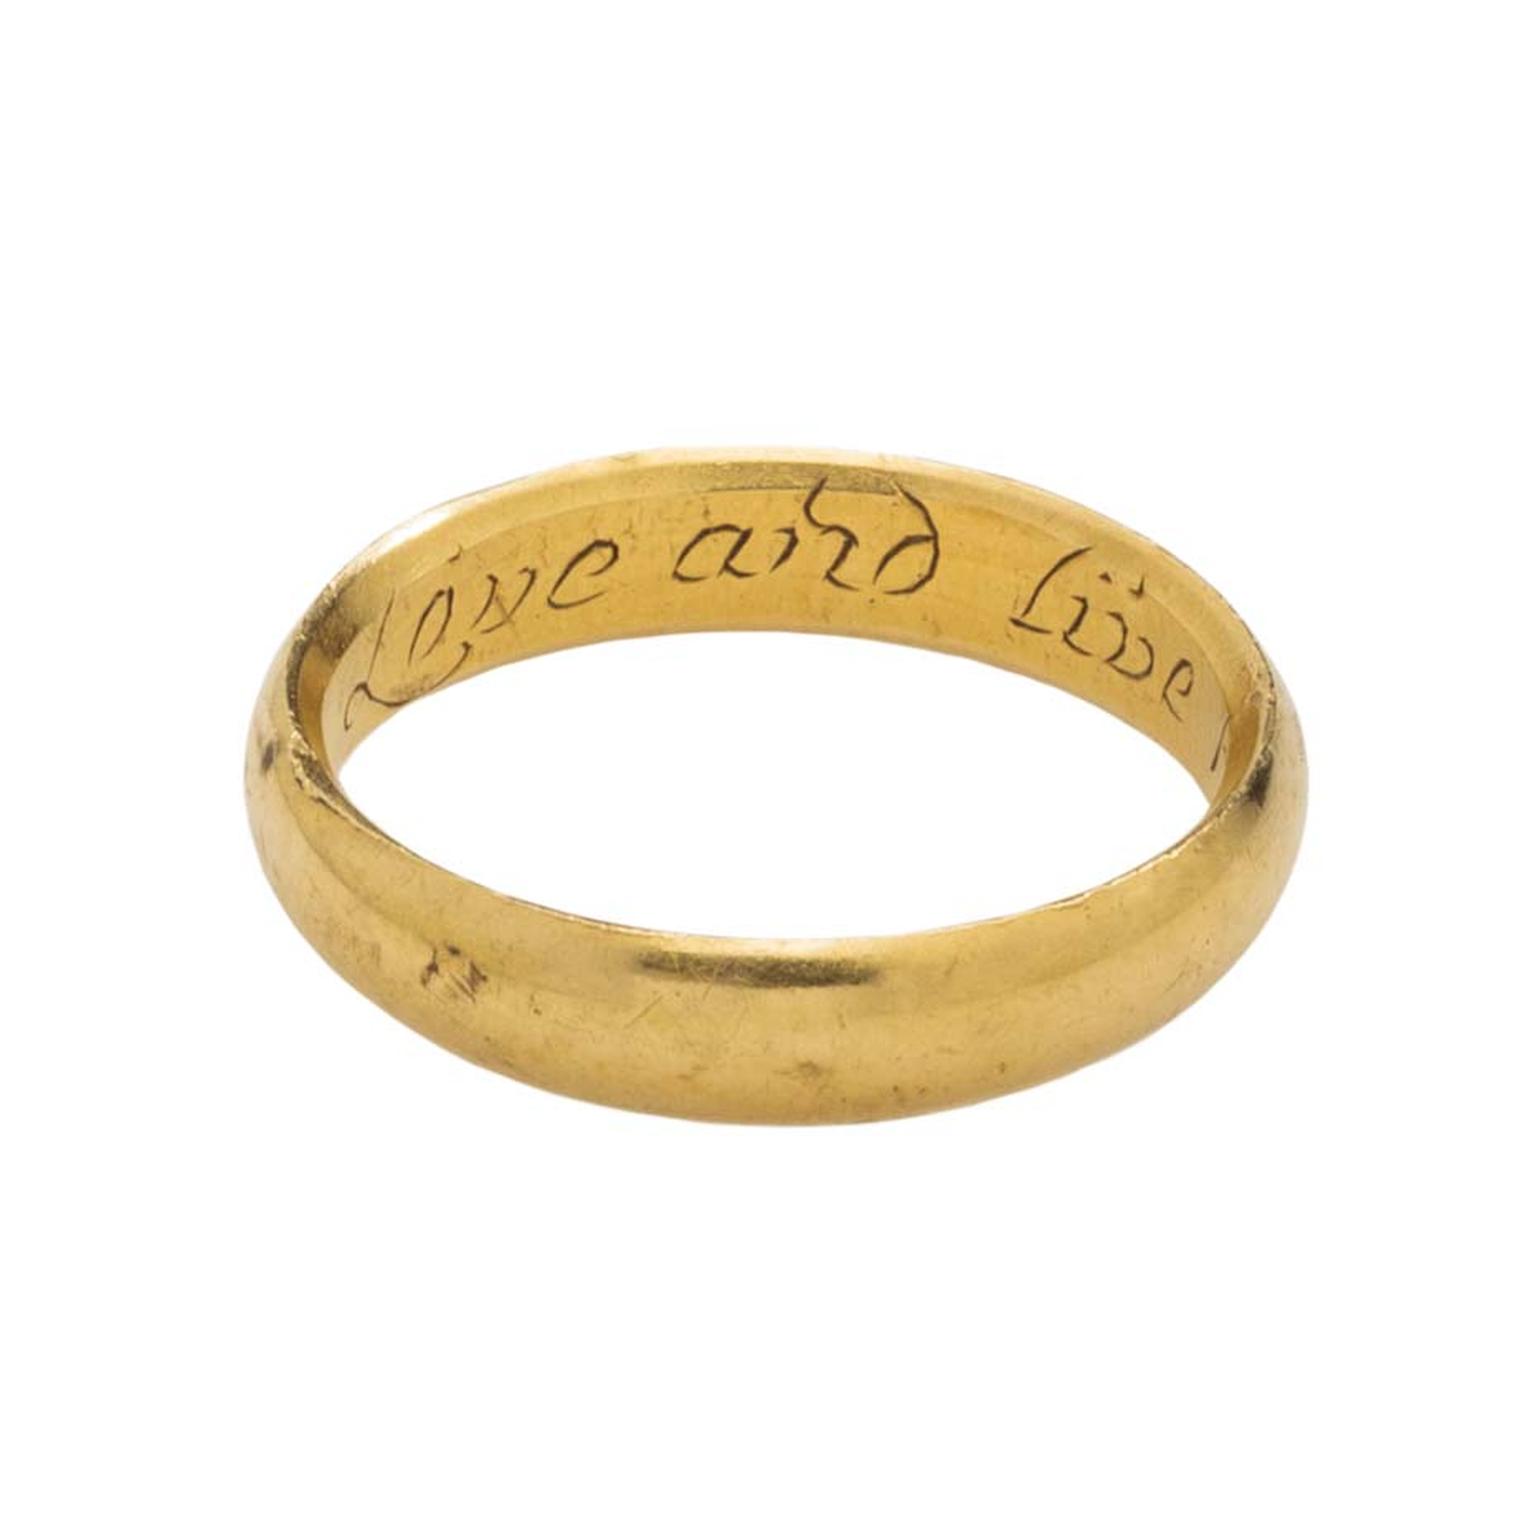 Treasures and Talismans Exhibition_Love and Live happy gold ring.jpg